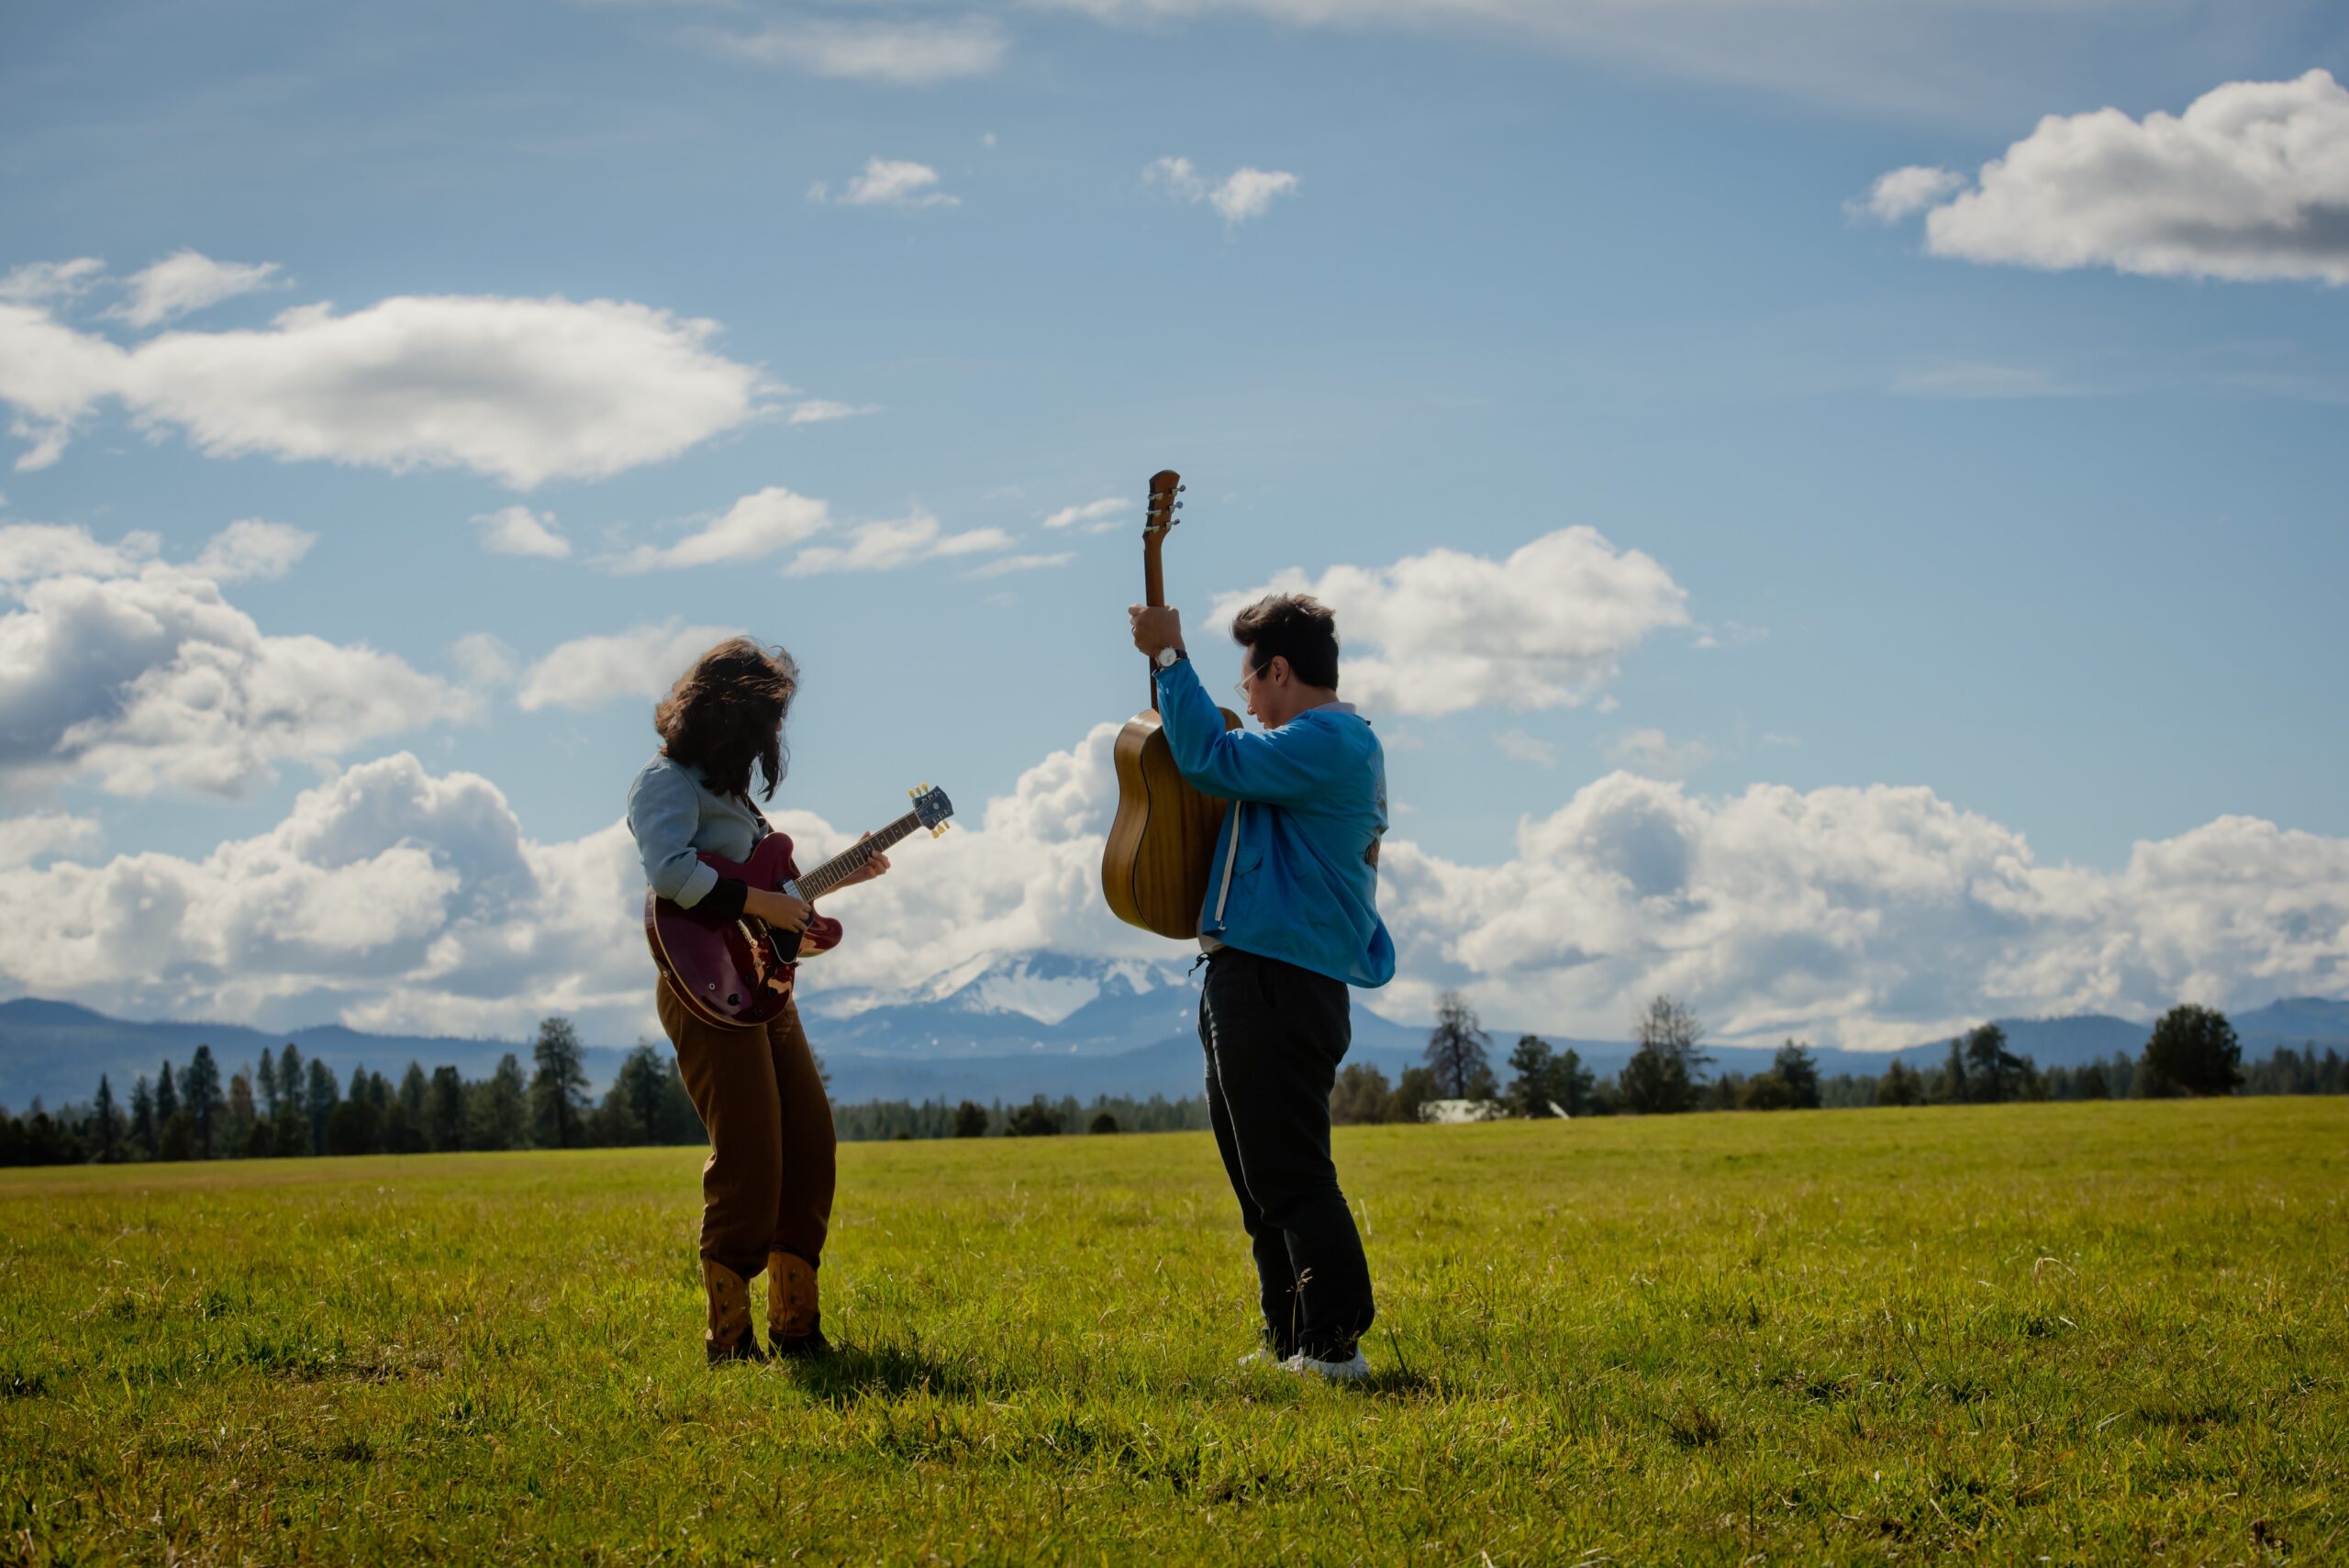 Two people wearing light blue denim button shirts holding guitars stand in a field of grass, mountains and clouds in the background.